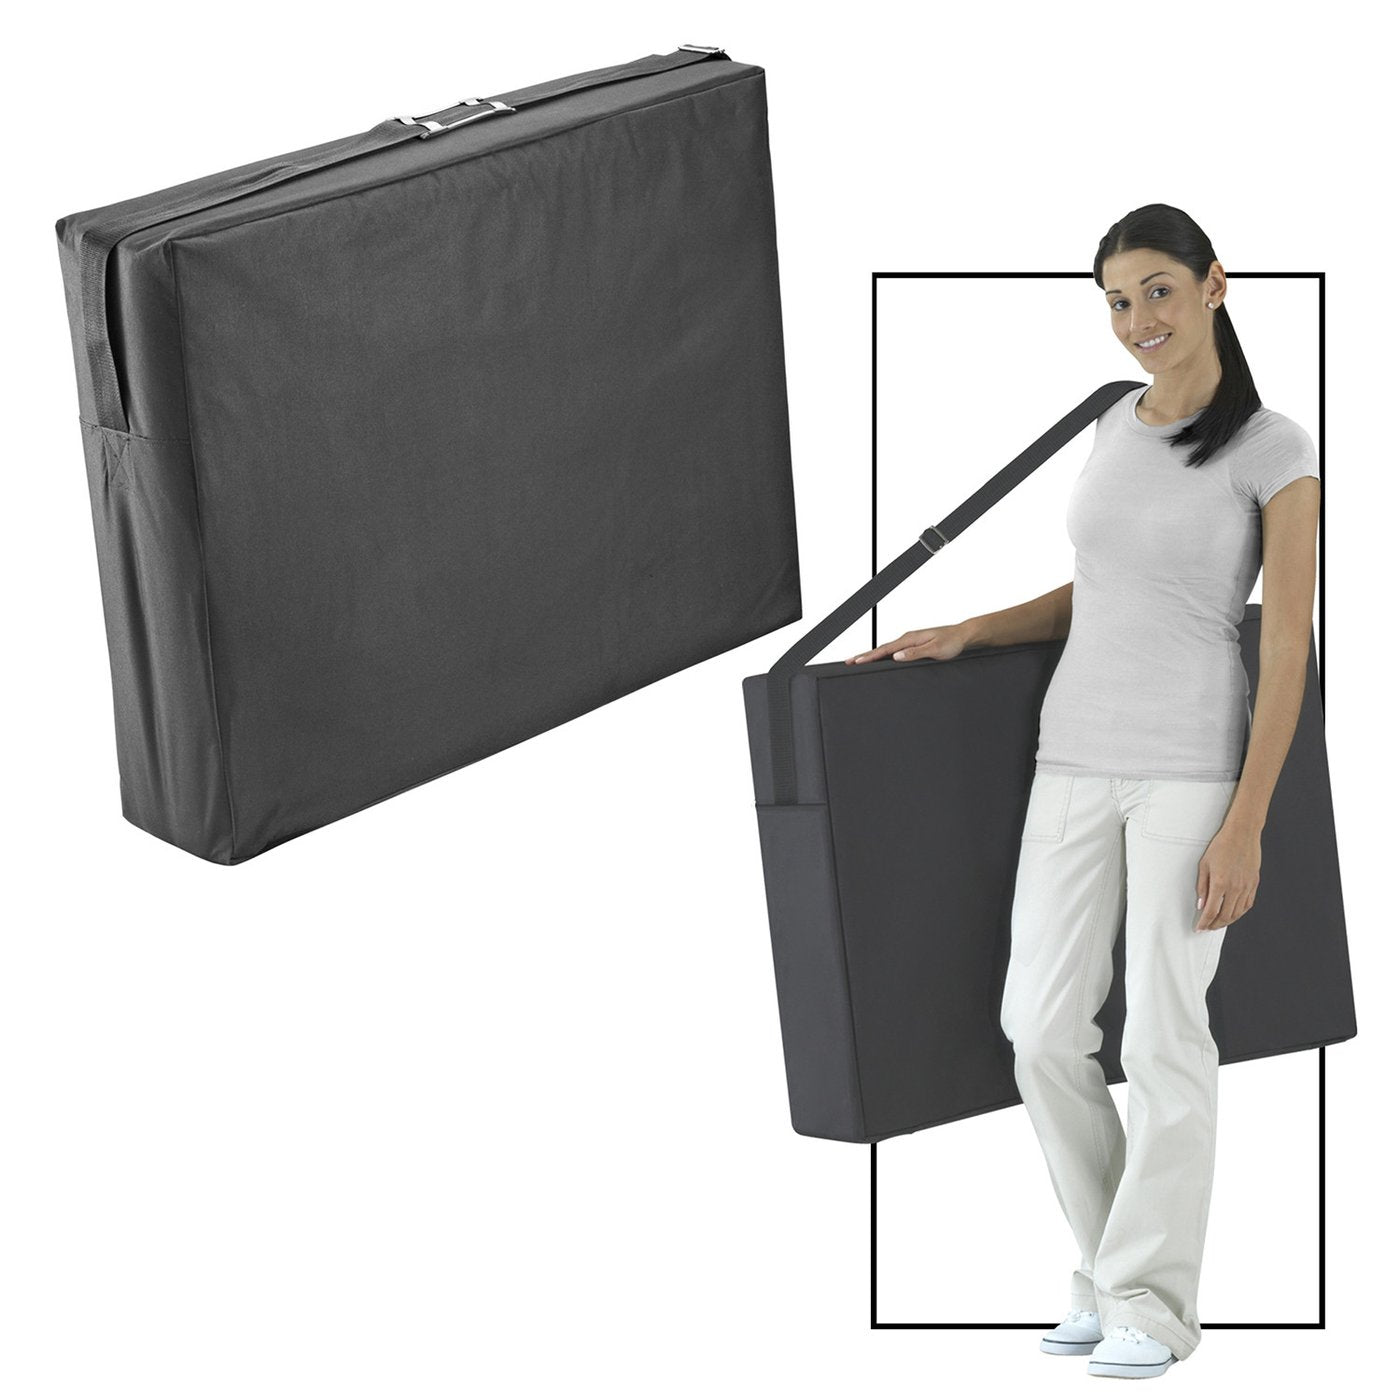 27" BRADY™ Portable Massage Table Package - Convenient Size Makes it GREAT for On-the-Go Therapists!